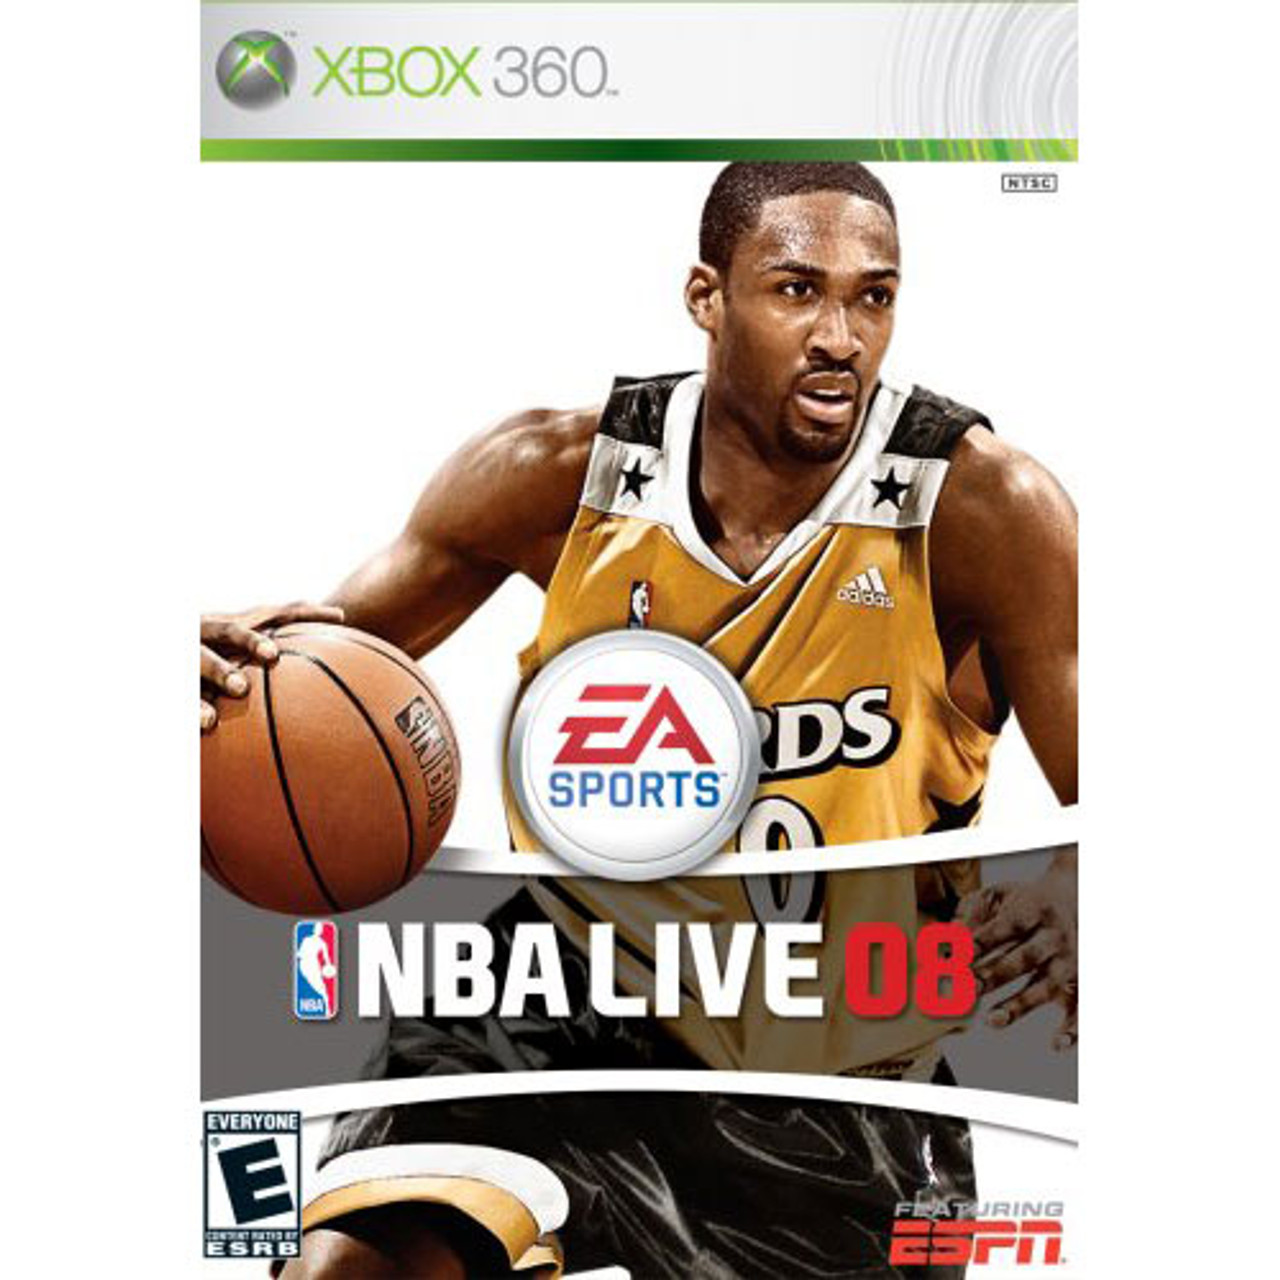 NBA Live 08 Xbox 360 game For Sale DKOldies